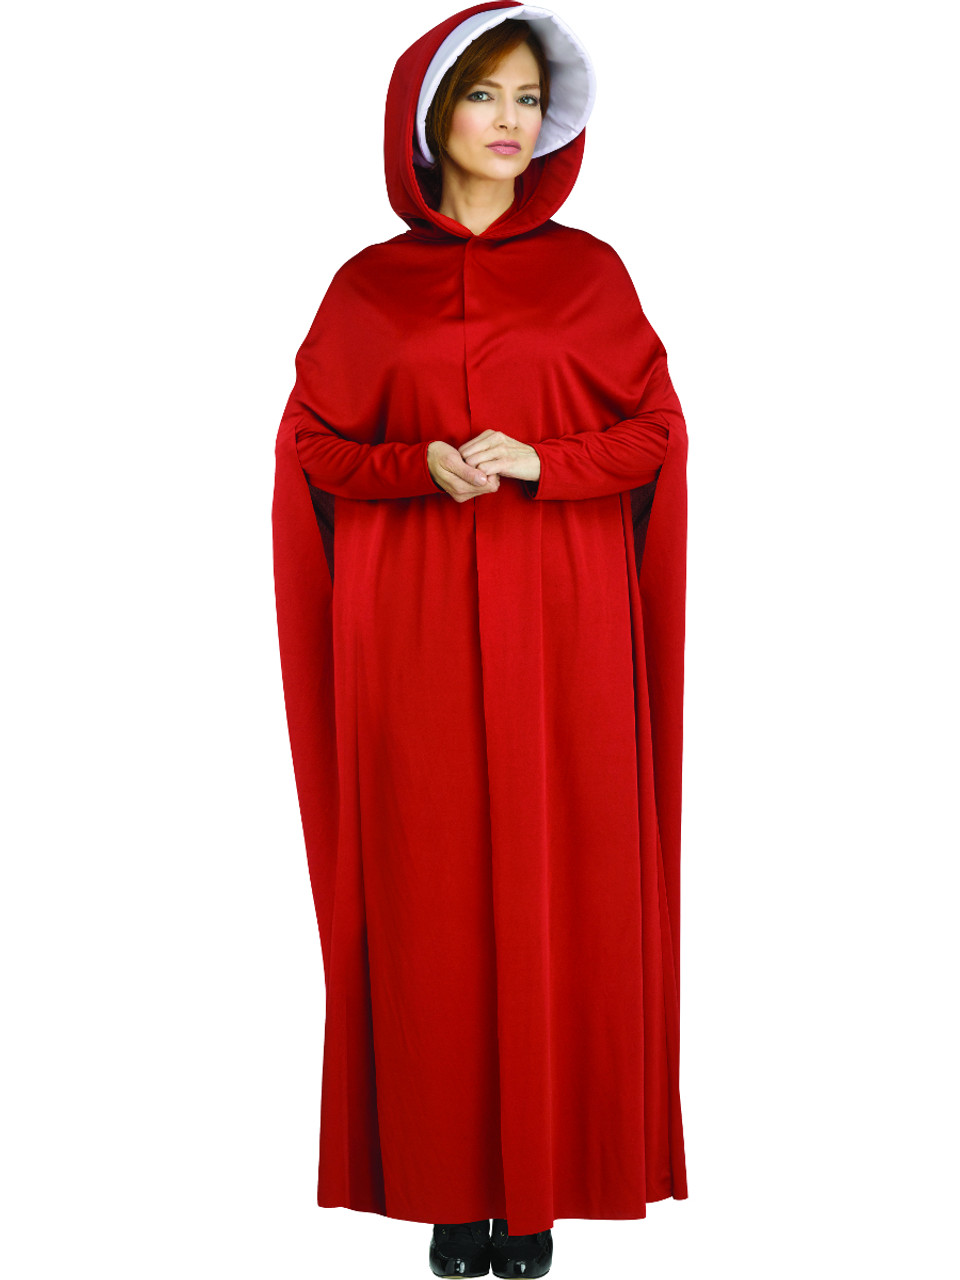 Adult Red Hooded Cape